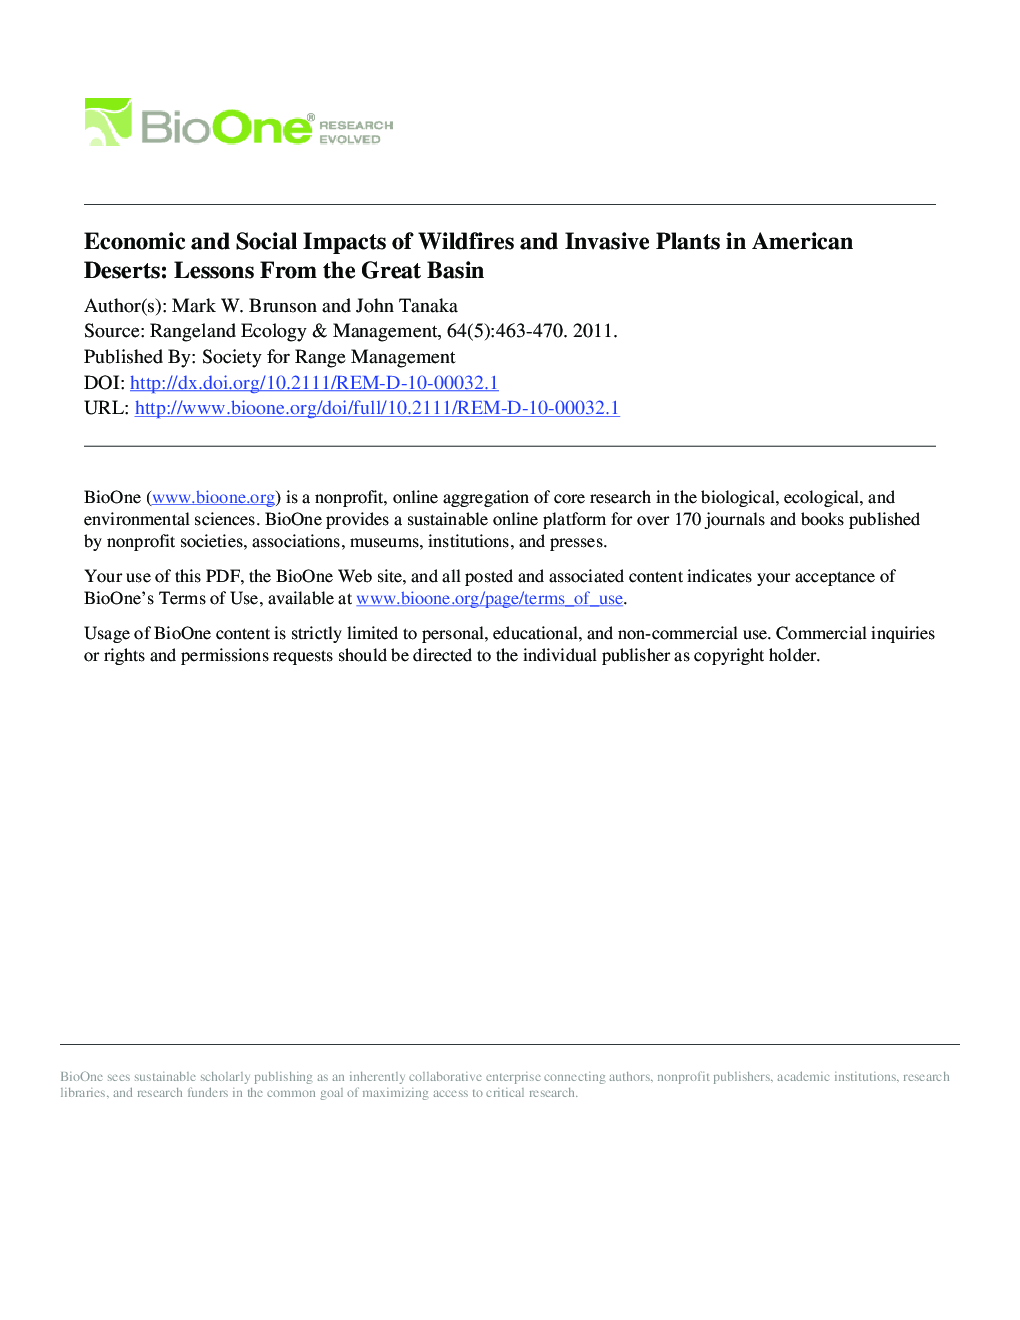 Economic and Social Impacts of Wildfires and Invasive Plants in American Deserts: Lessons From the Great Basin